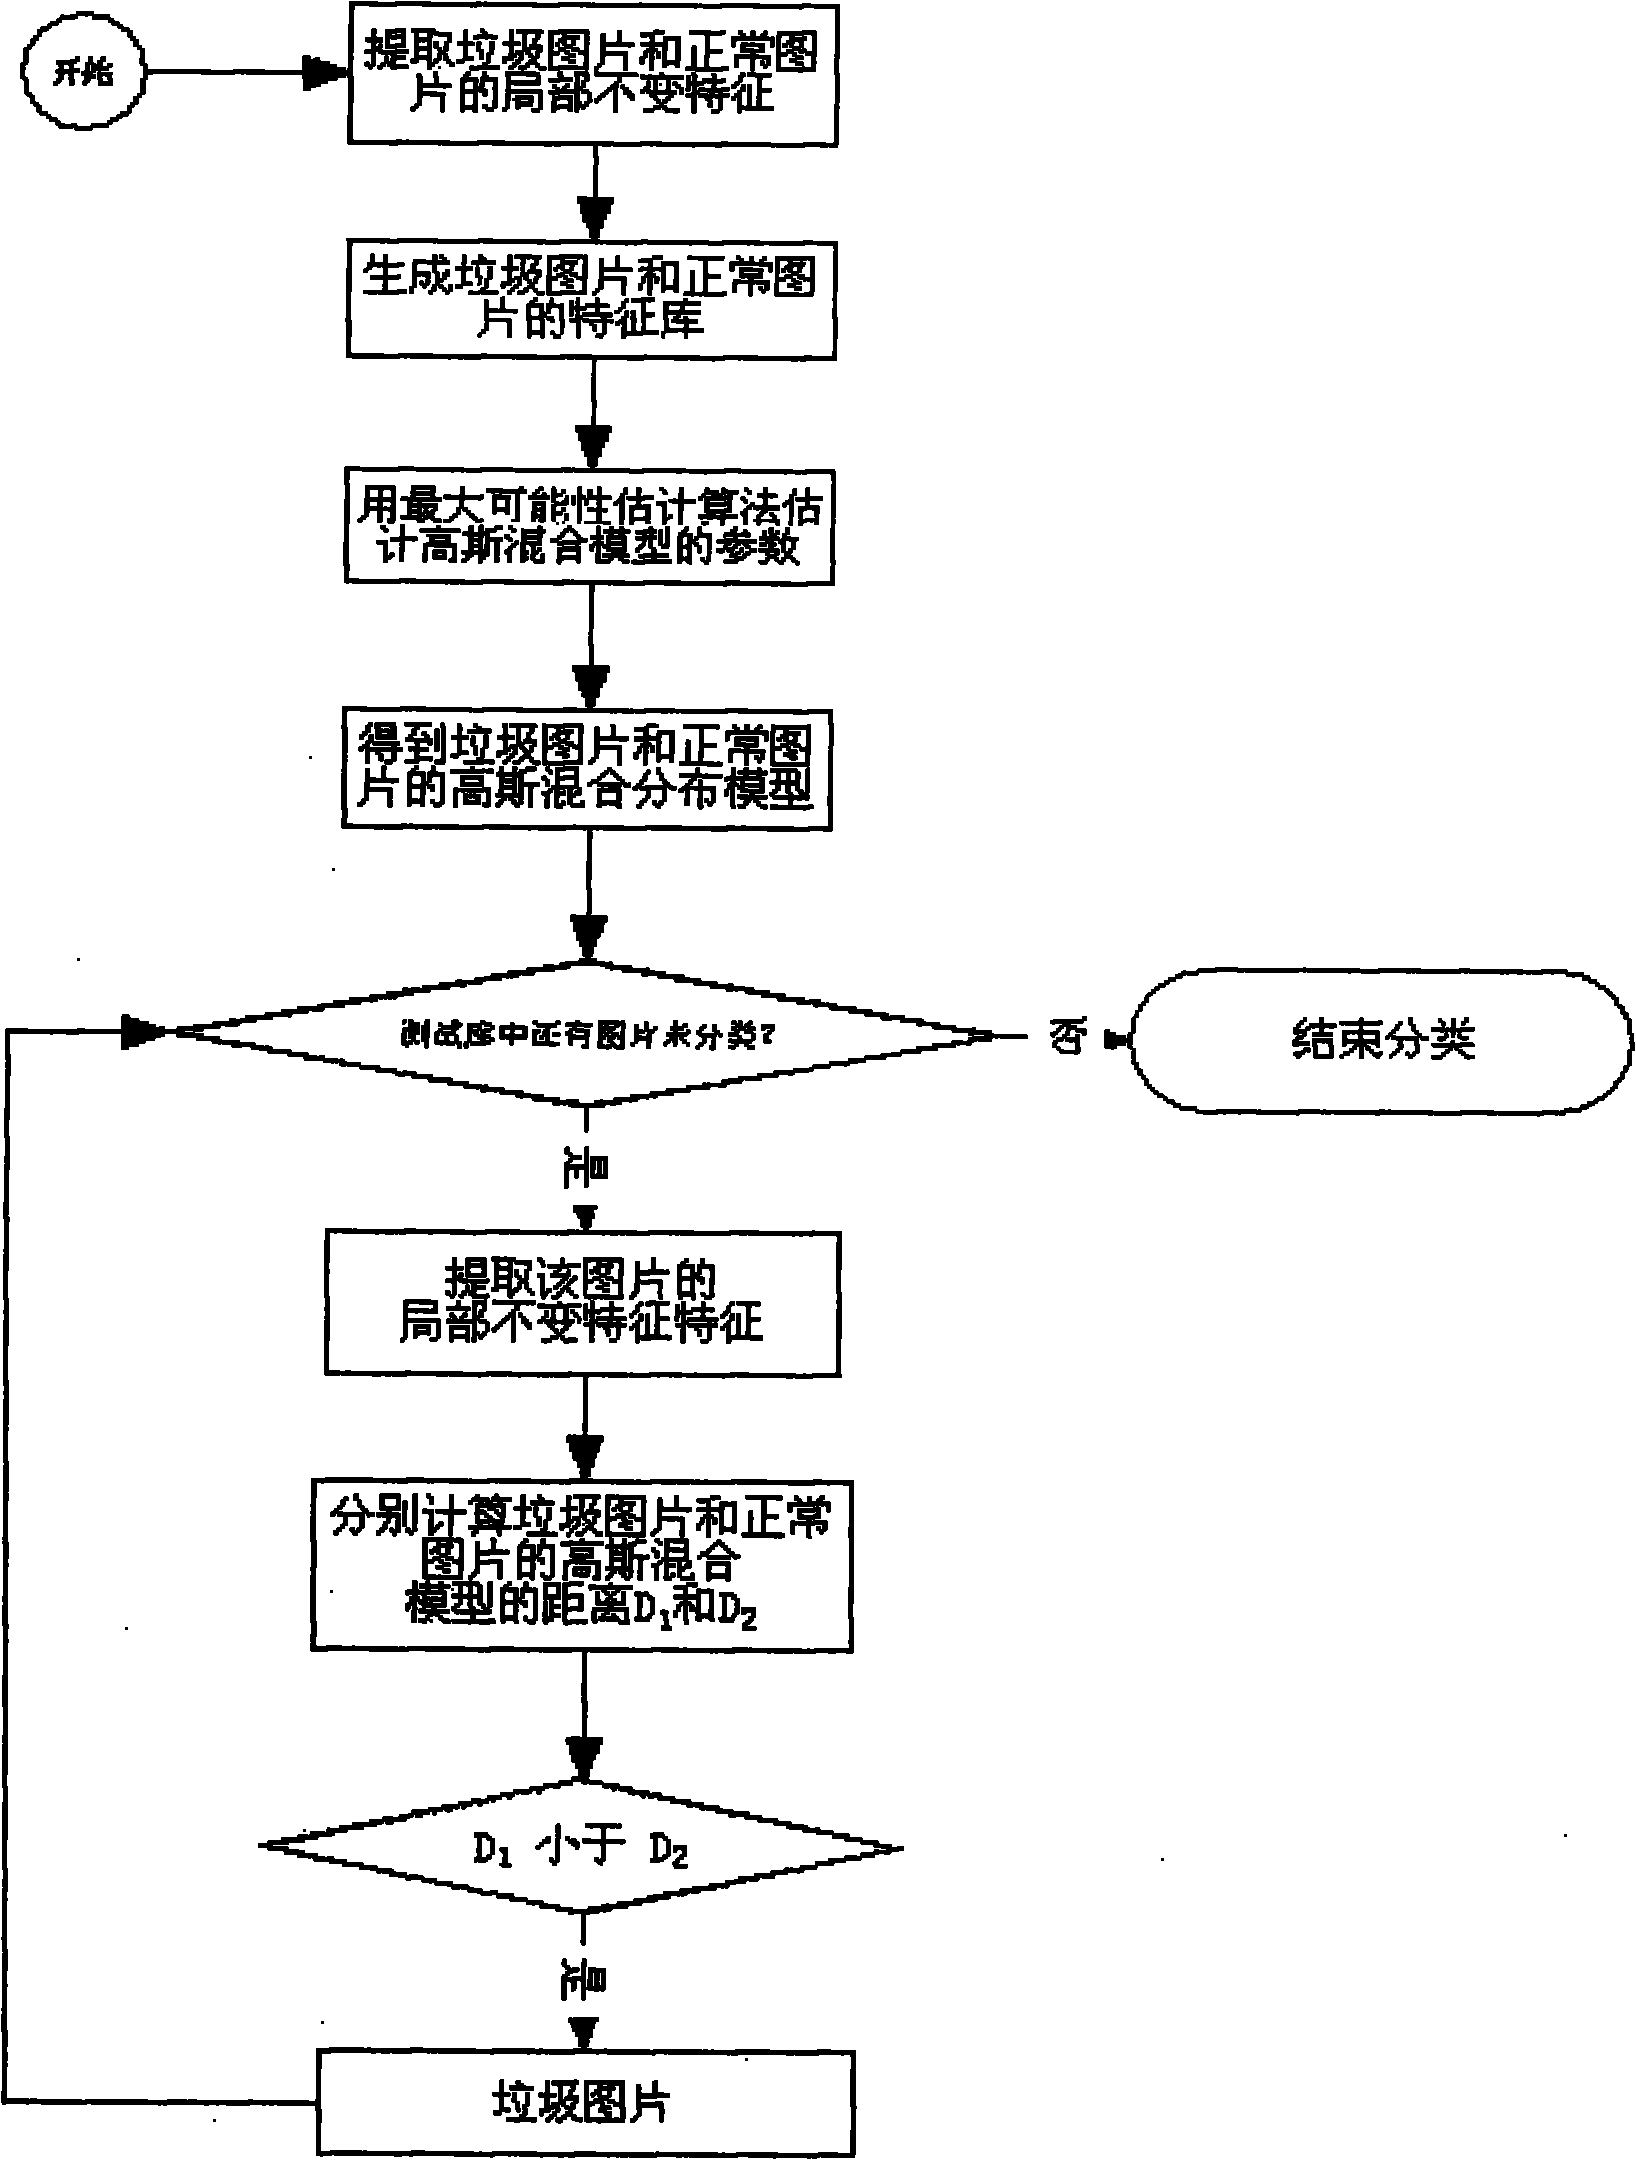 Method for detecting image-based spam by utilizing image local invariant feature